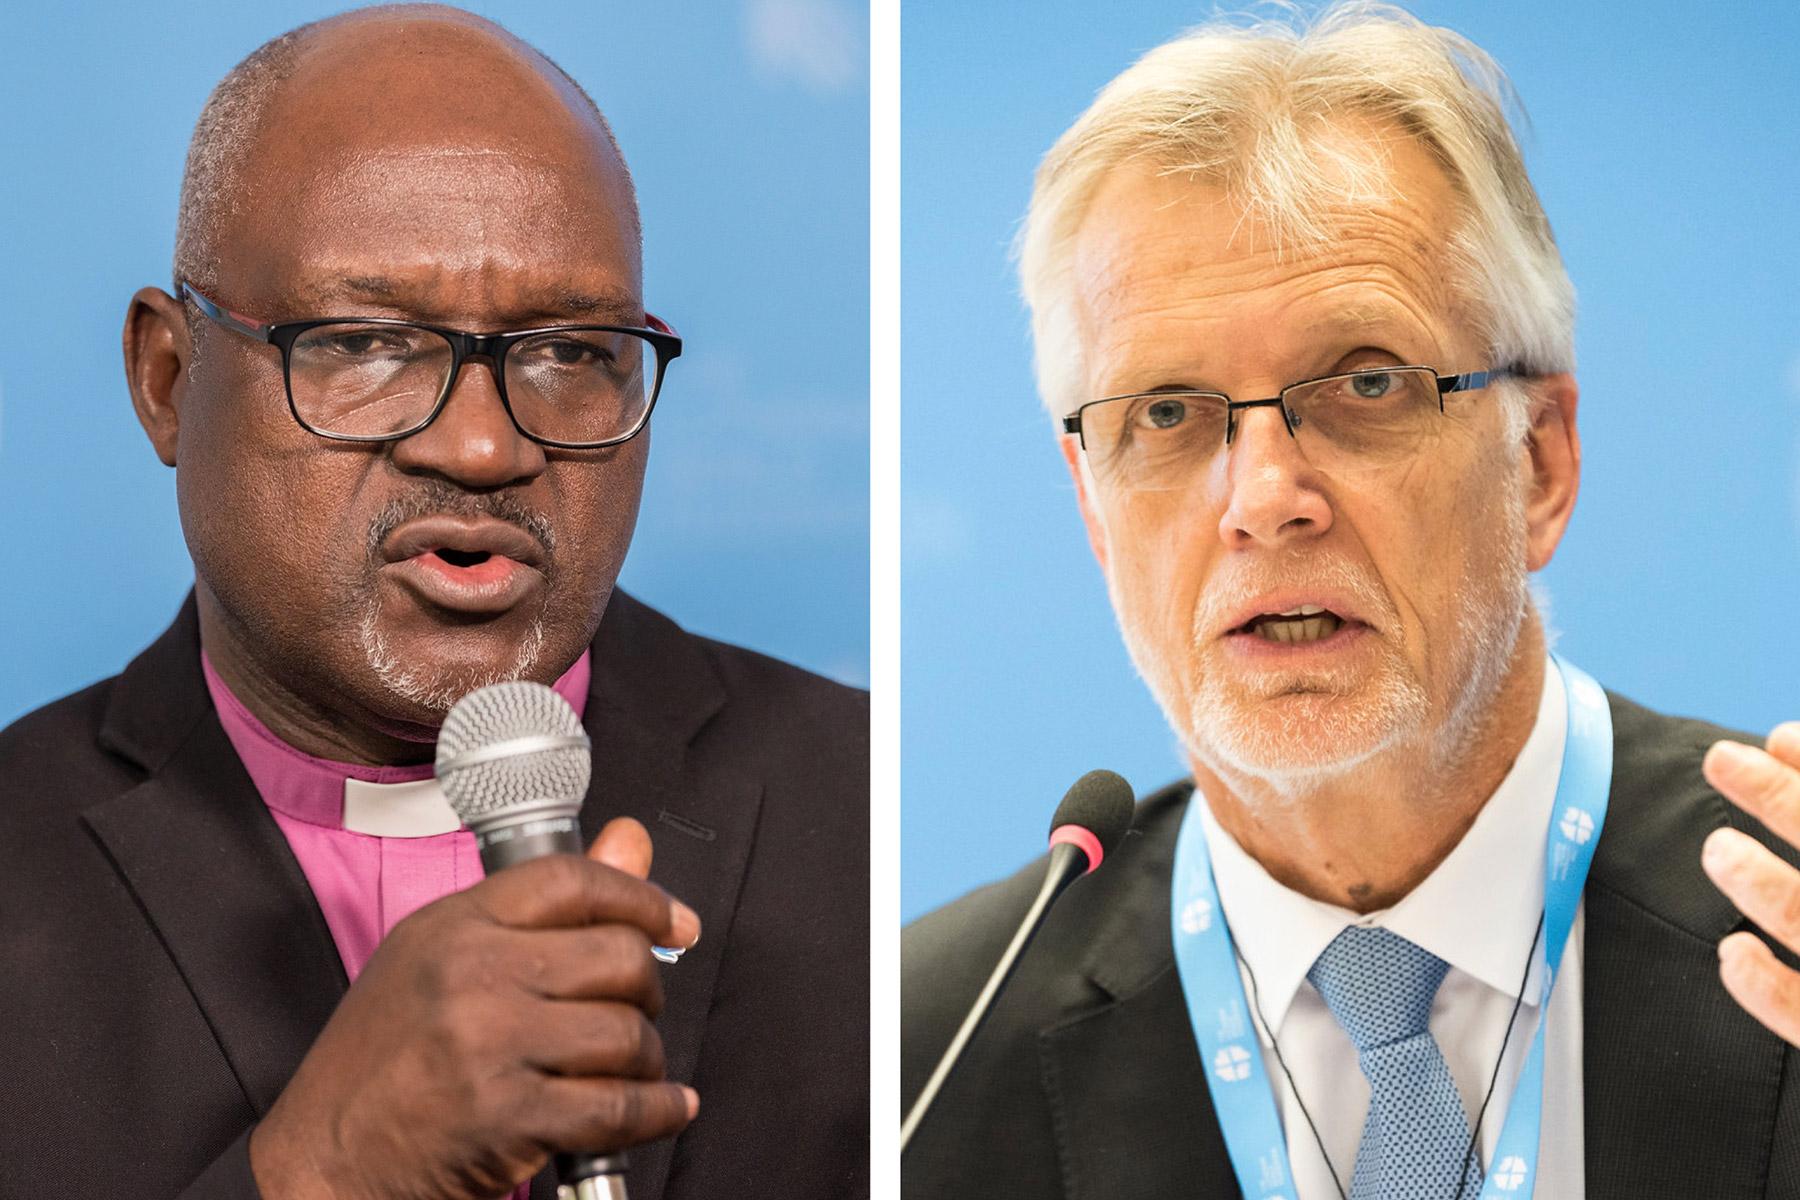 Composite photo.Â LWF PresidentÂ Musa and General Secretary JungeÂ say solidarity and cooperation must know no boundaries, as COVID-19 spreads across borders.Â Photos:Â LWF/A. HillertÂ 